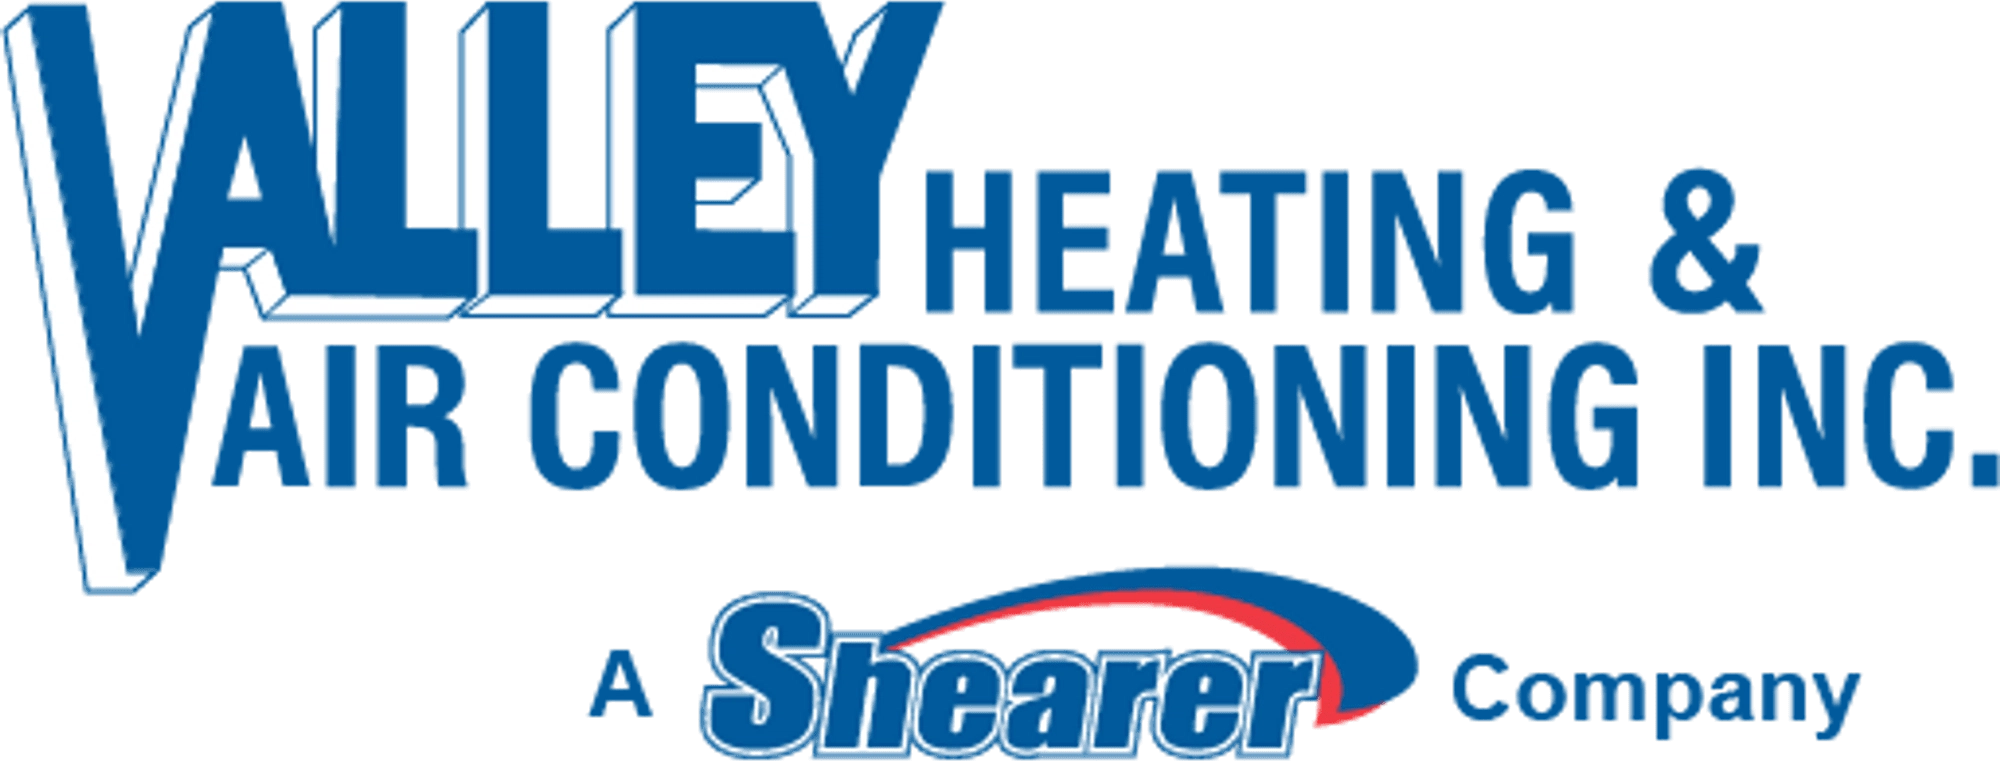 Valley Heating & Air Conditioning Inc. Logo